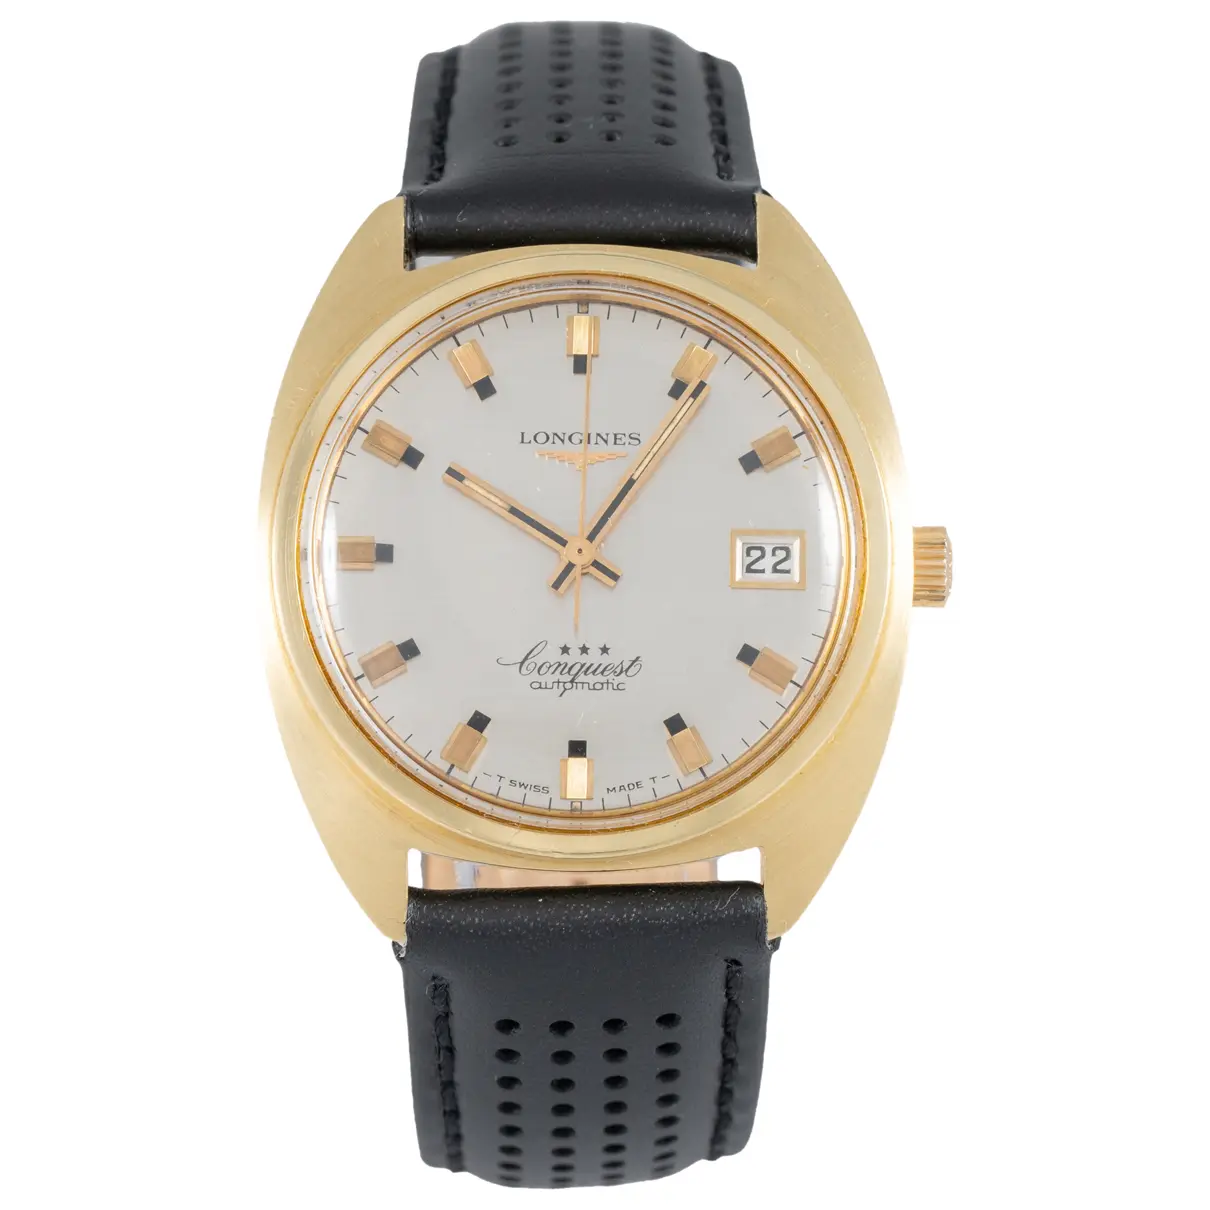 Conquest yellow gold watch